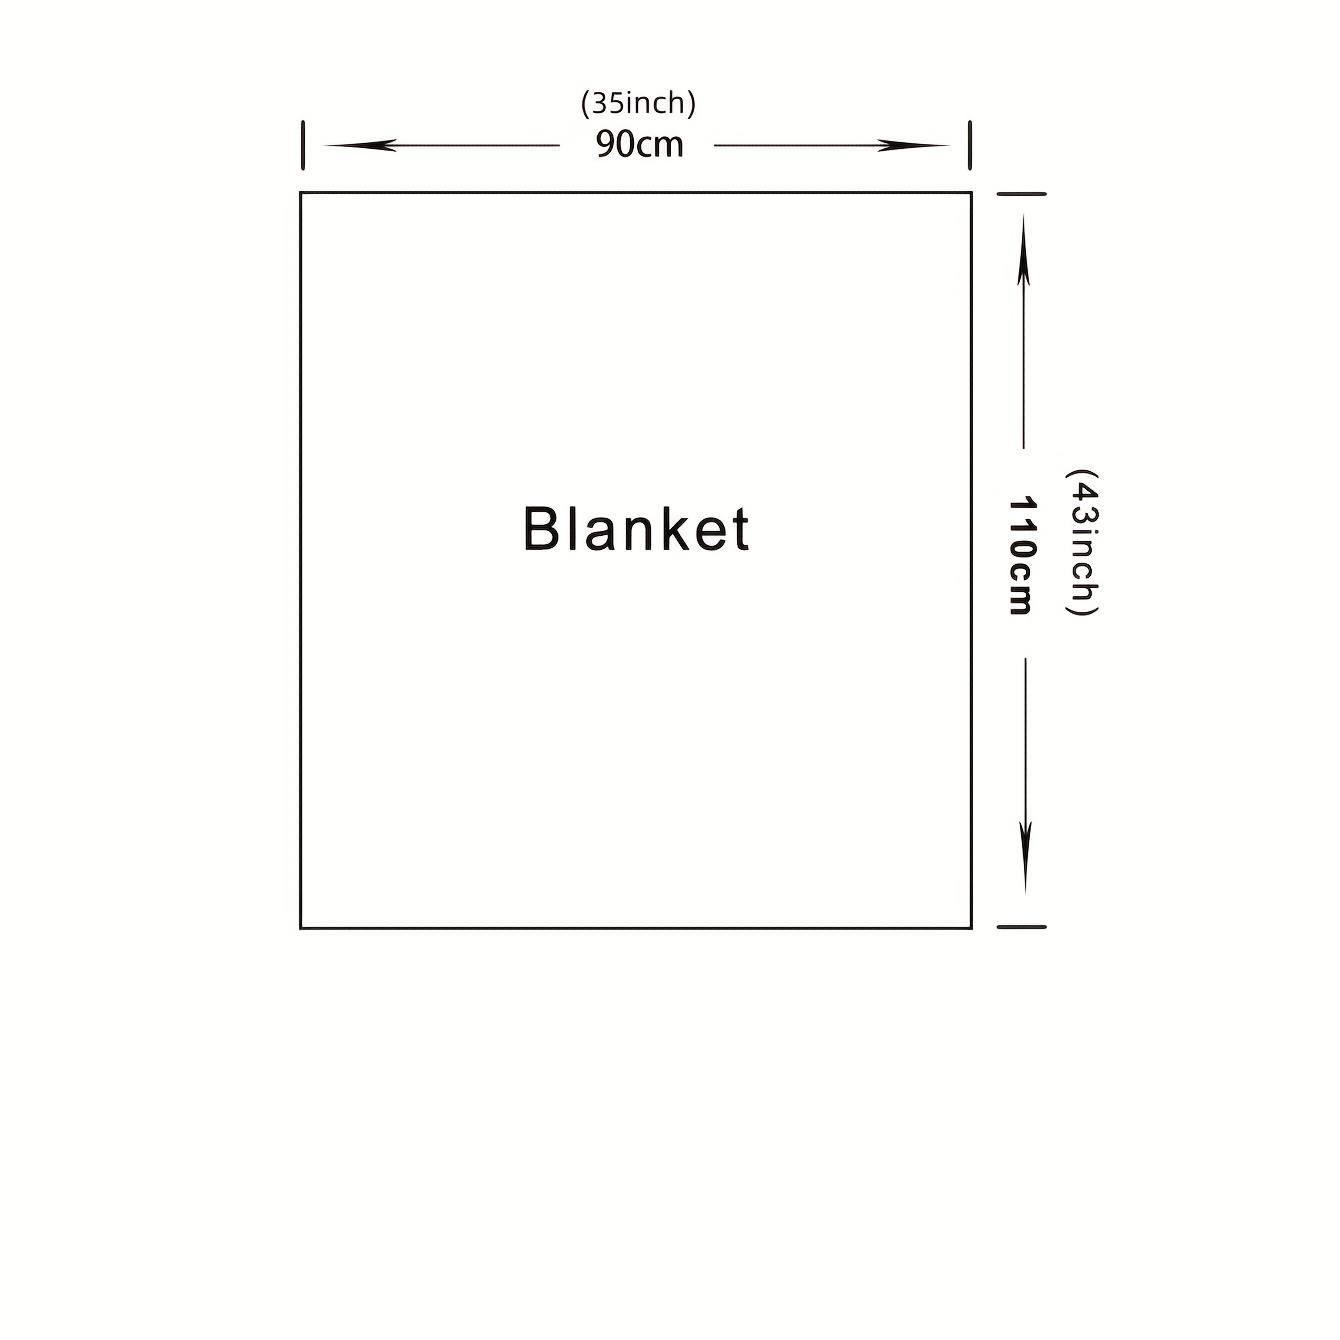 Blanket Size Chart from Lovey to King Sizes! - Pattern Paradise